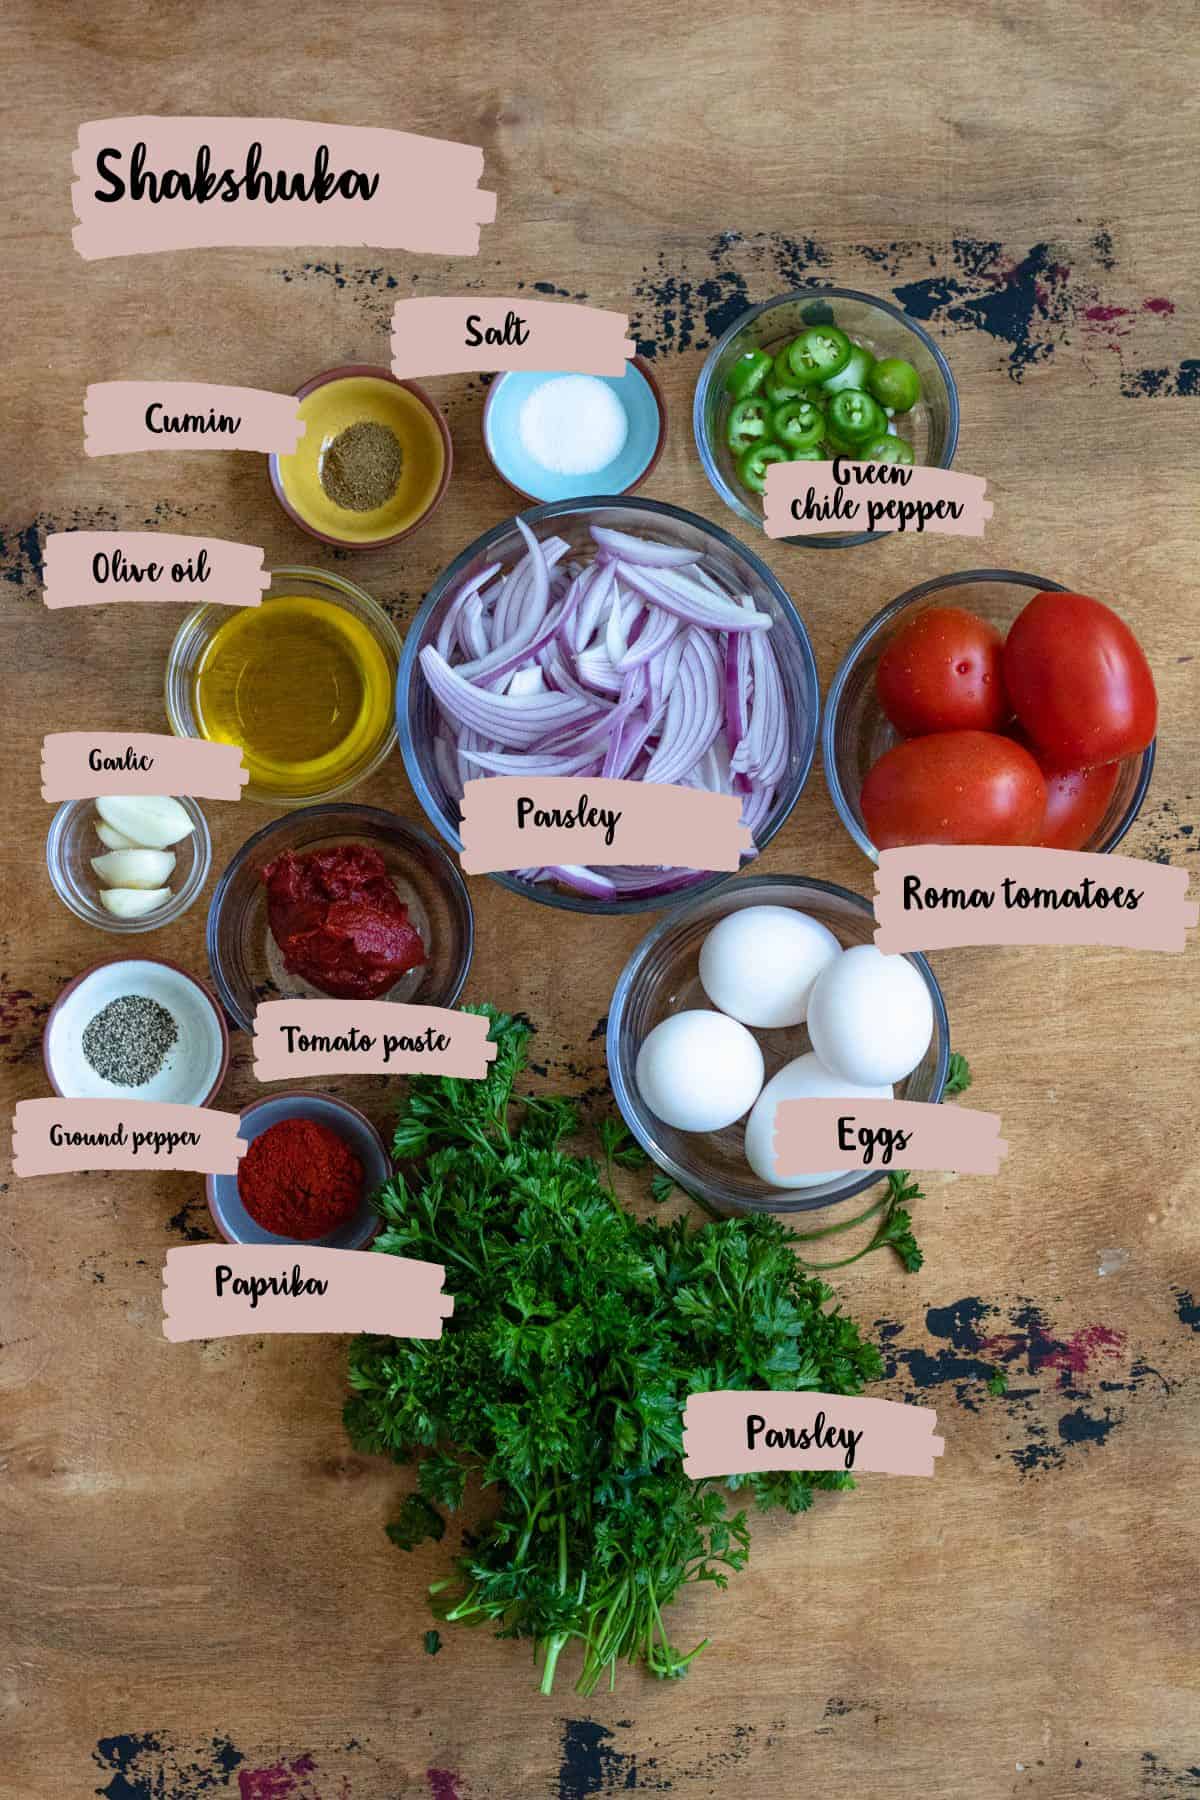 Ingredients shown that are needed to prepare shakshuka recipe. 